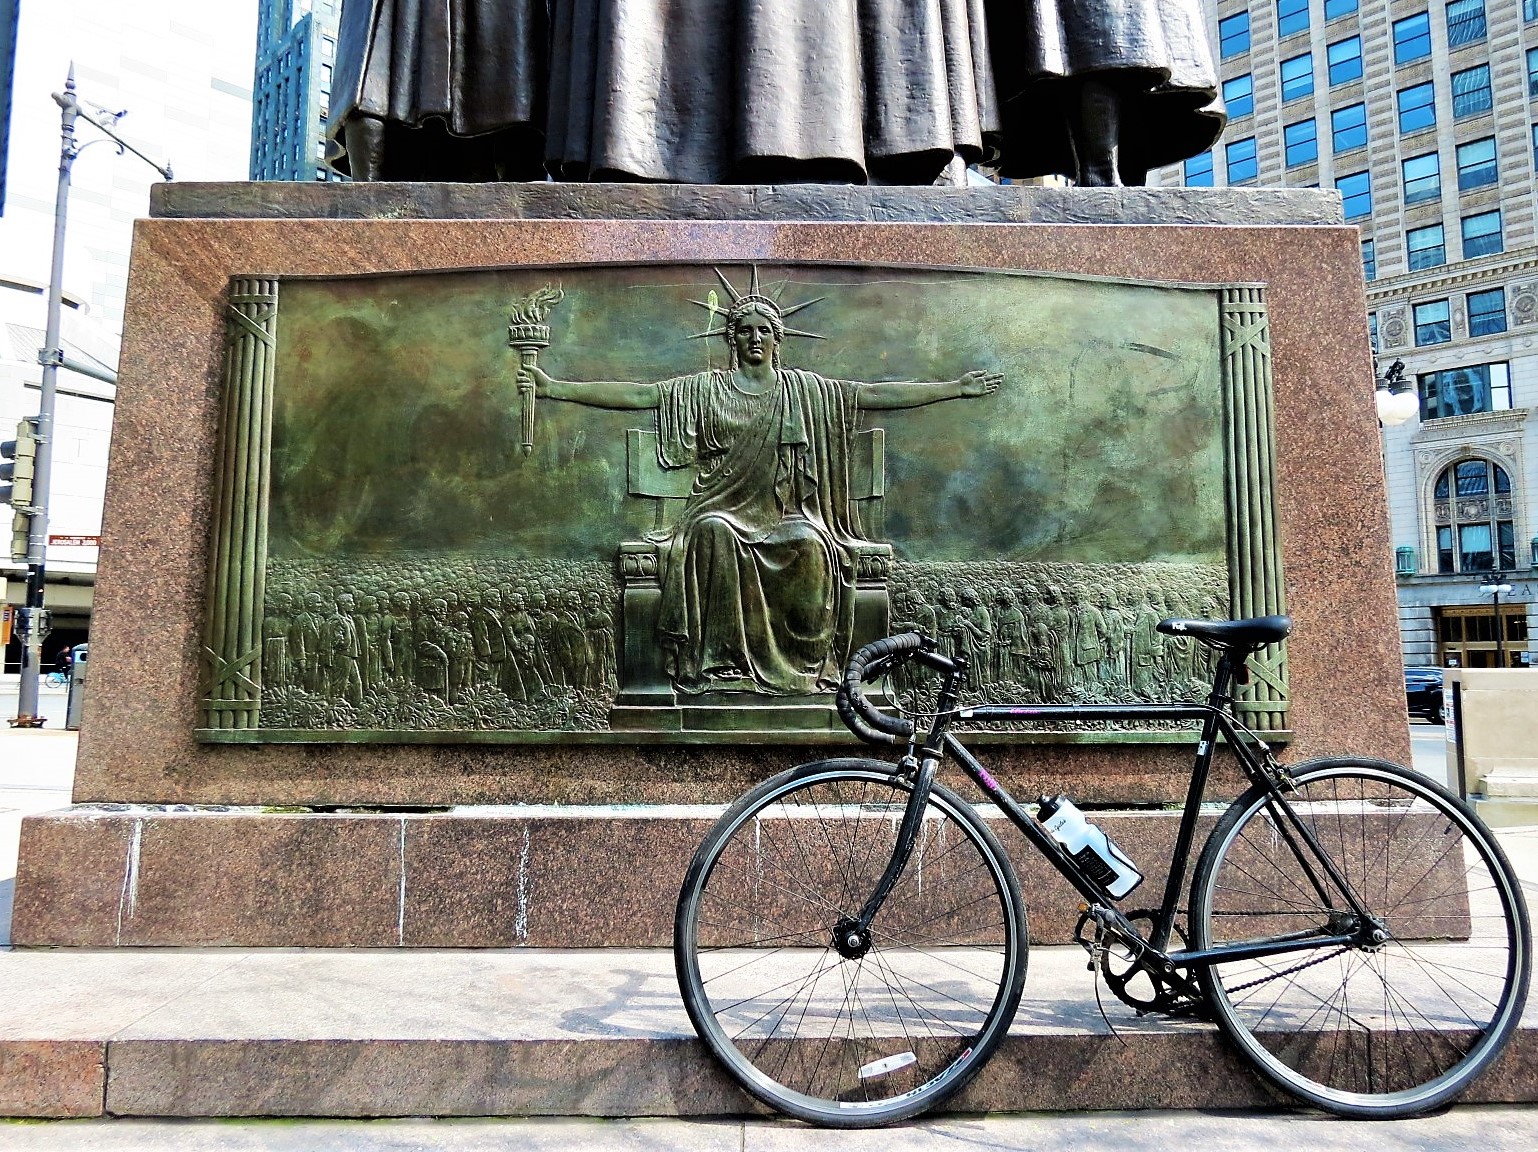 A tour bike leaning on a granite statue base embedded with a copper bas relief of Lady Liberty stretching her arms out over a crowd of people.